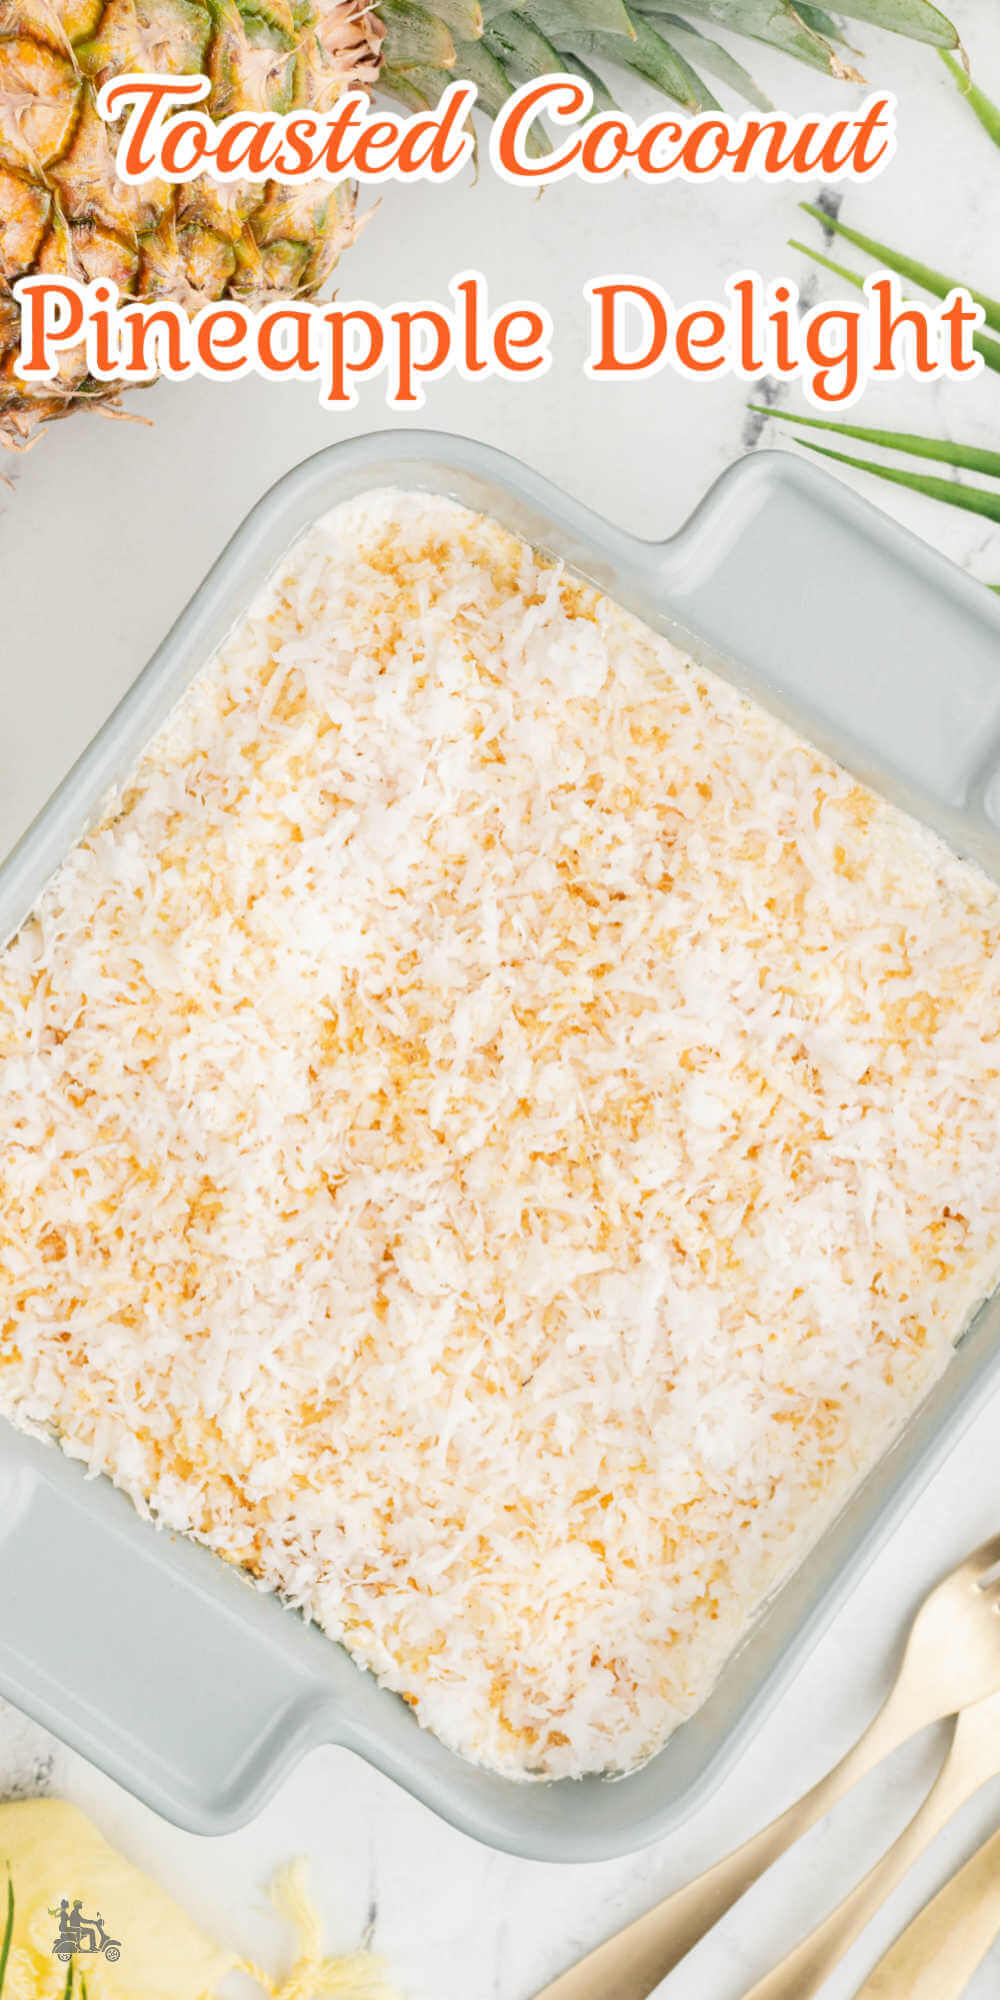 This tropical coconut-pineapple delight recipe is a very easy dessert made with a crushed Graham cracker crust, cream cheese, and pineapple filling, then covered with a whipped topping with toasted coconut and crushed Graham crackers as garnish. While technically the crust is baked, you don't have to, so make it completely a no-bake summer dessert.